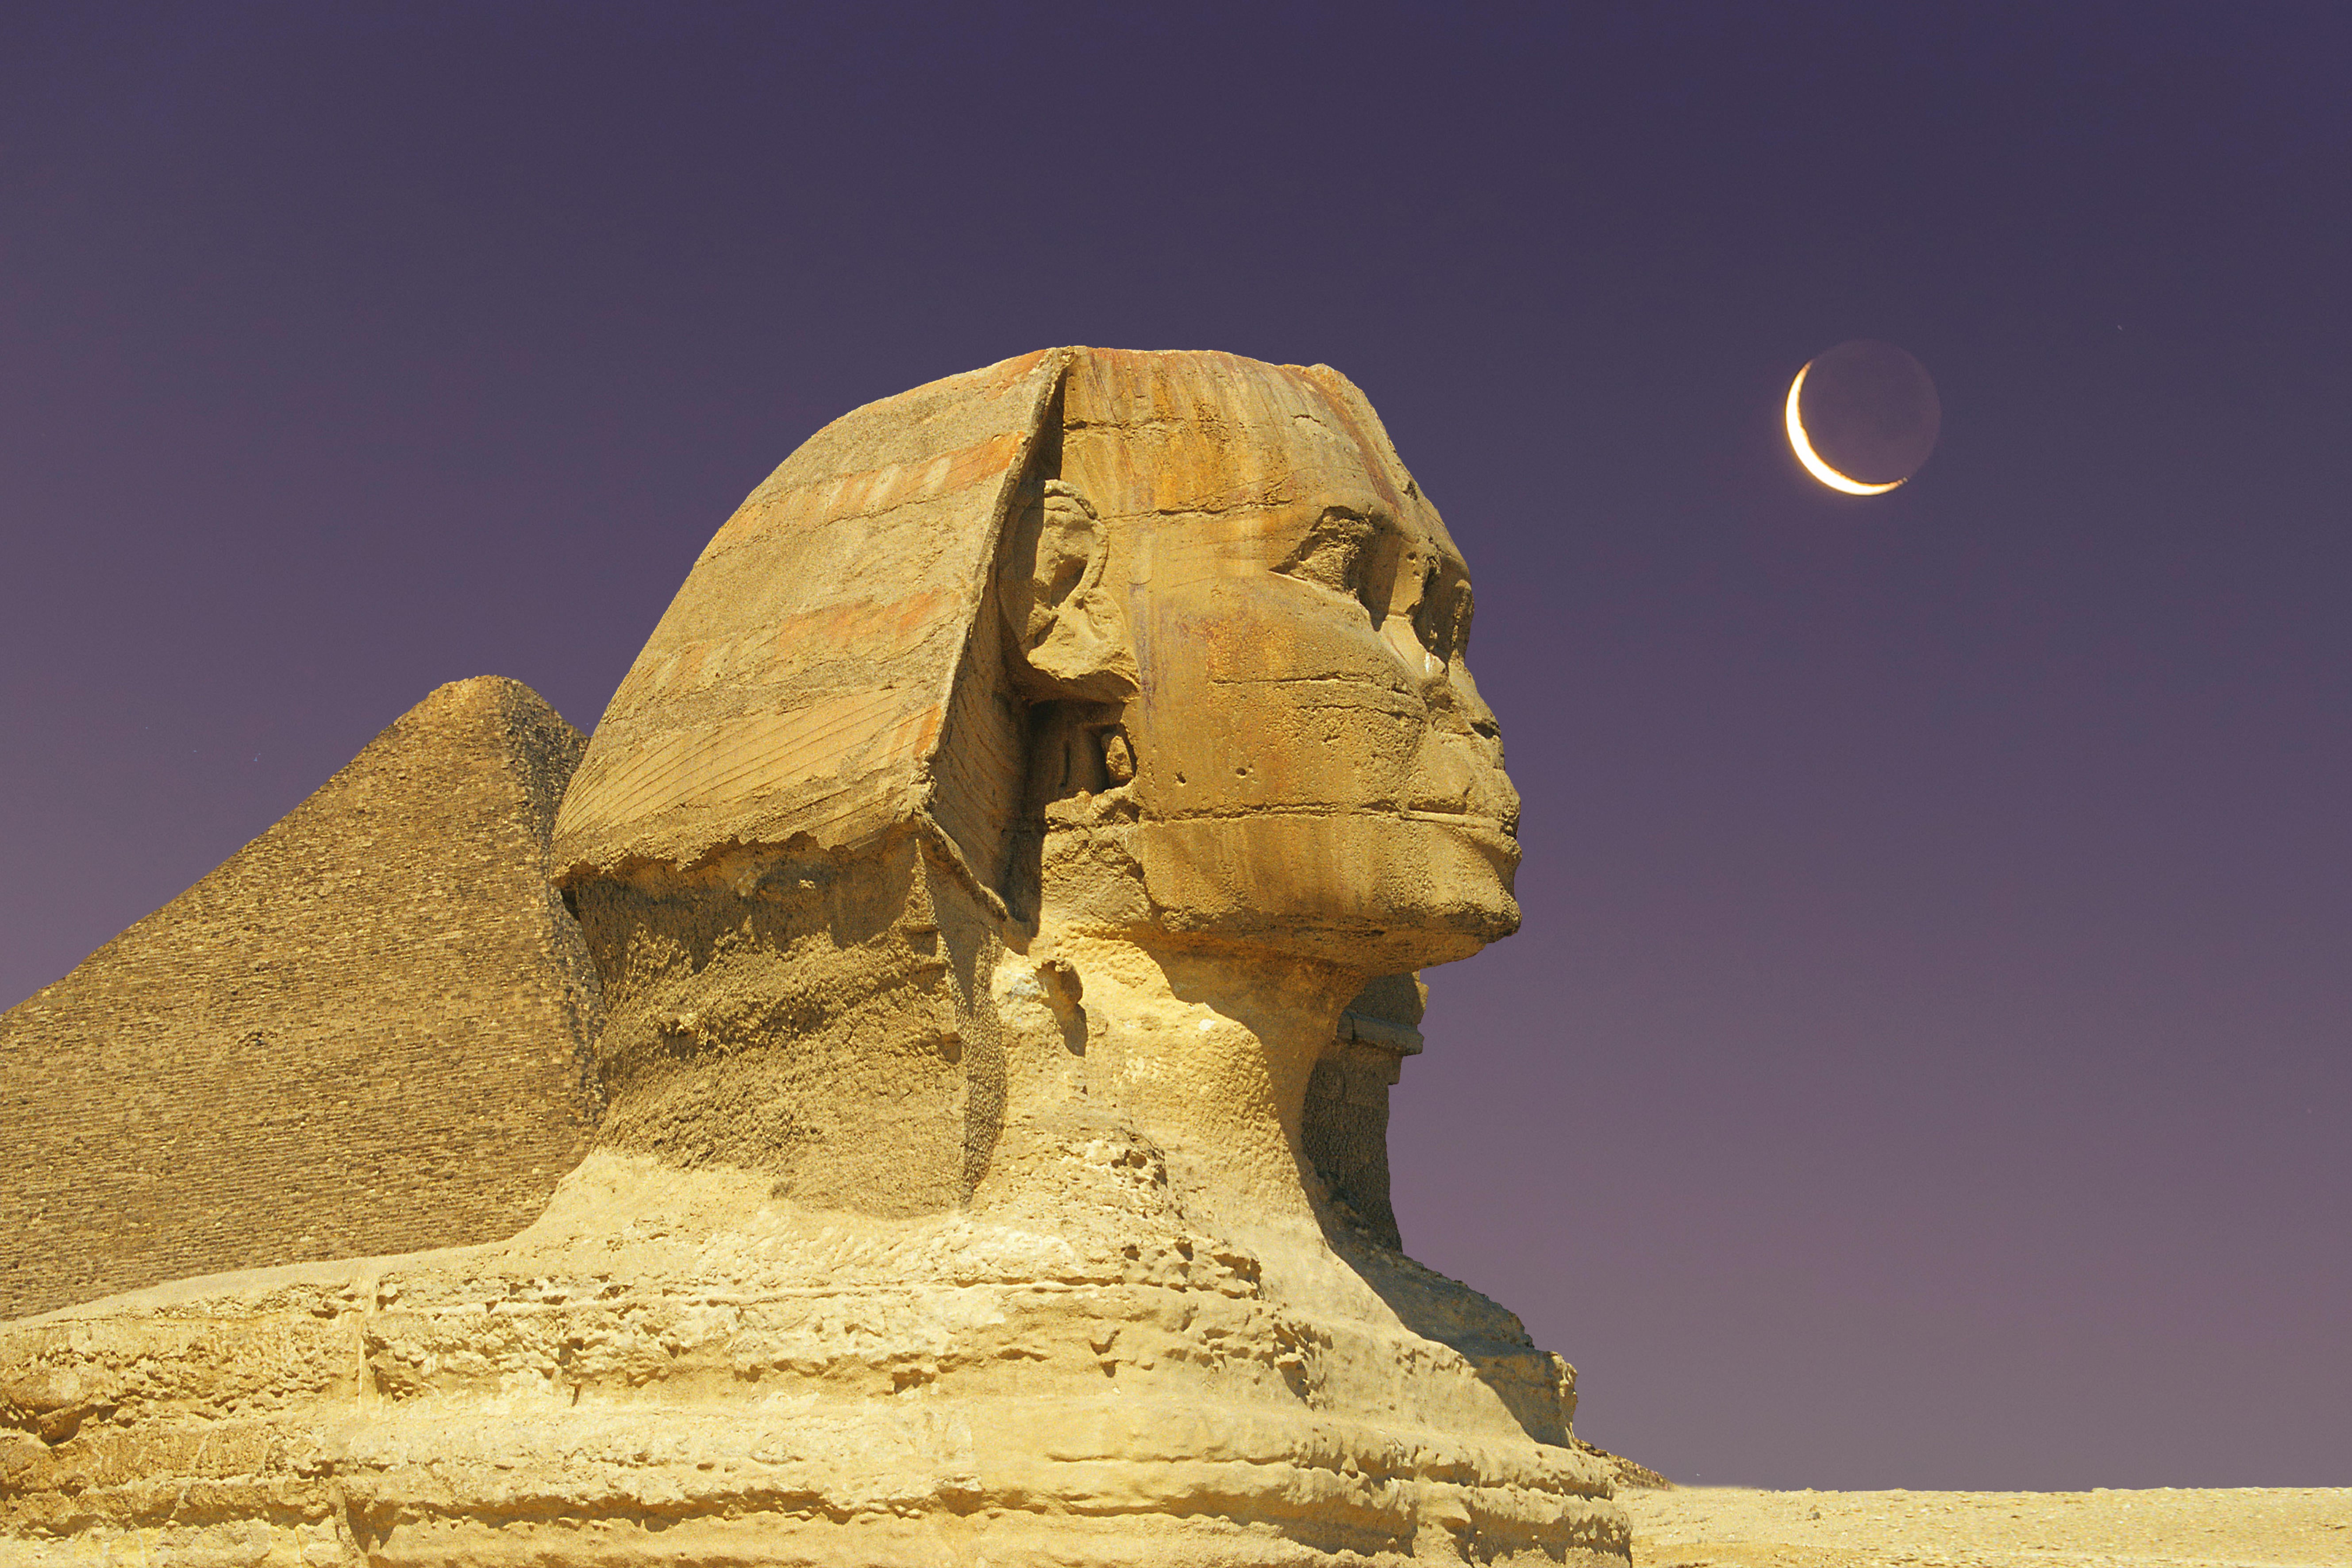 Sphinx in Egypt with crescent moon in sky